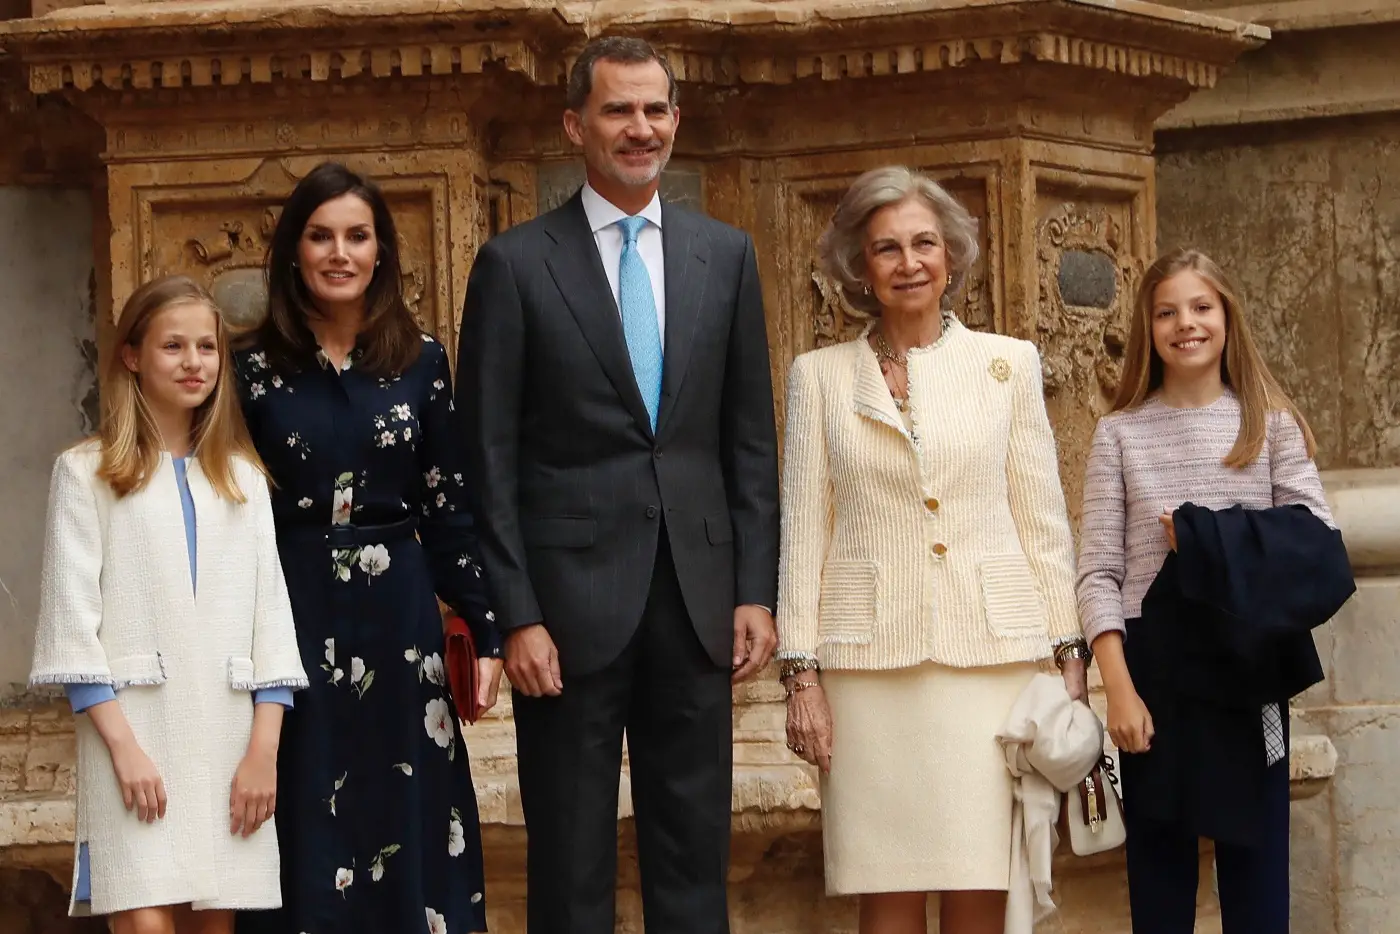 Spanish Royal Family at Easter Mass in 2019